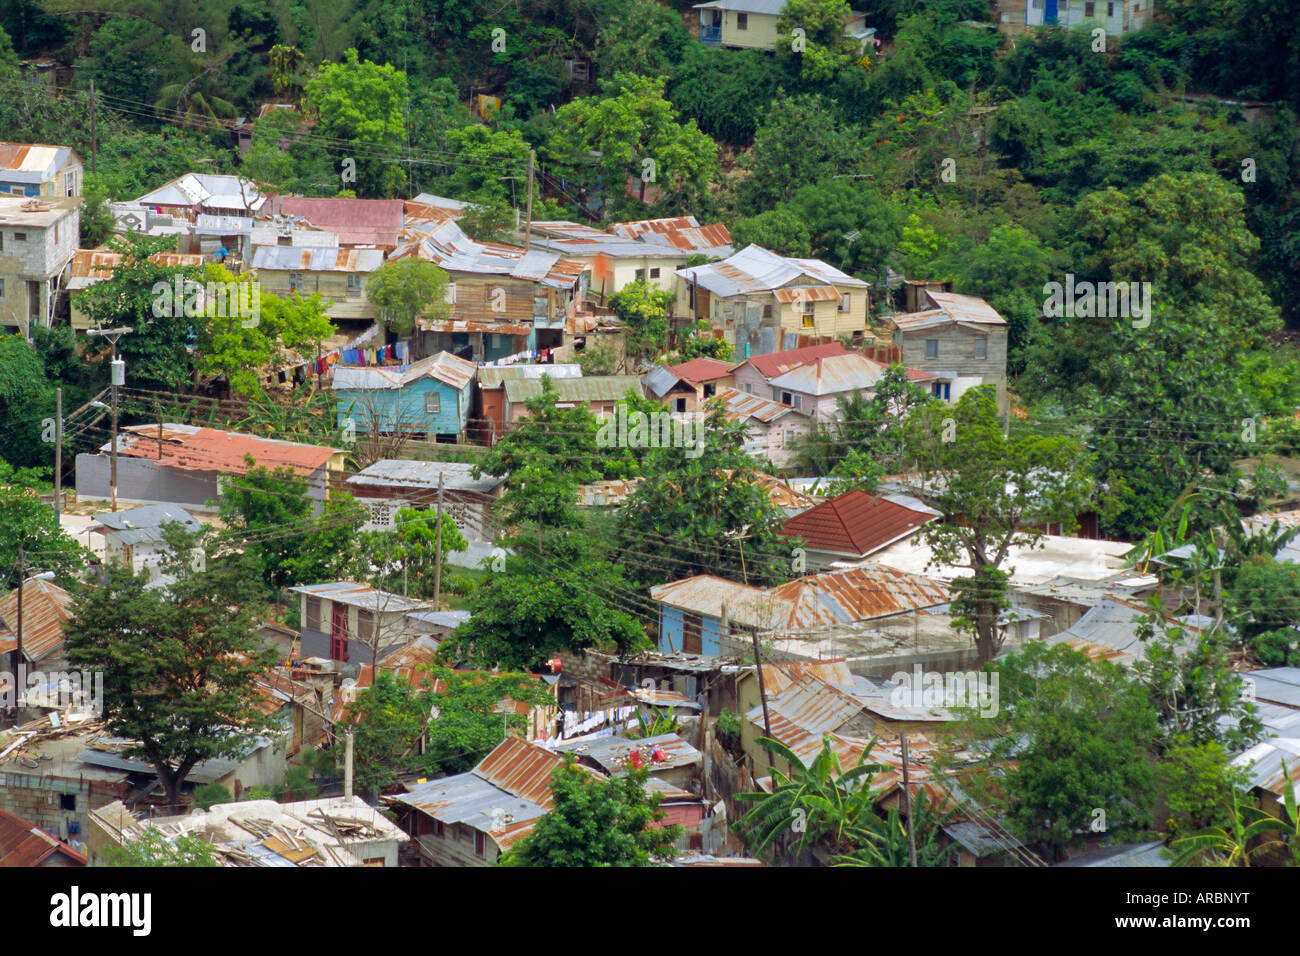 Shanty town, Montego Bay, Jamaica, Caribbean, West Indies Stock Photo